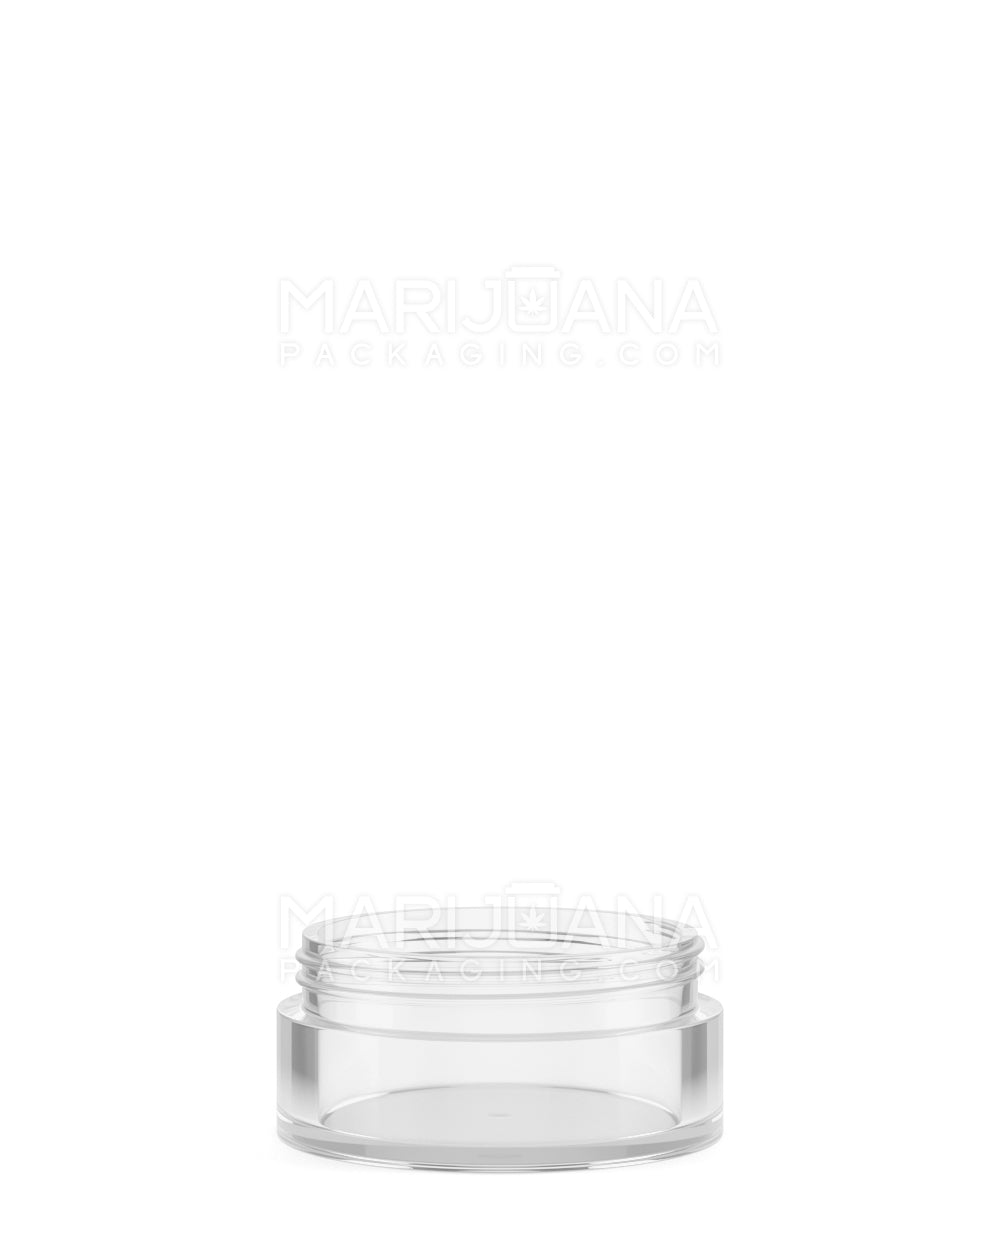 Clear Concentrate Containers w/ Screw Top Cap | 10mL - Plastic - 100 Count - 4